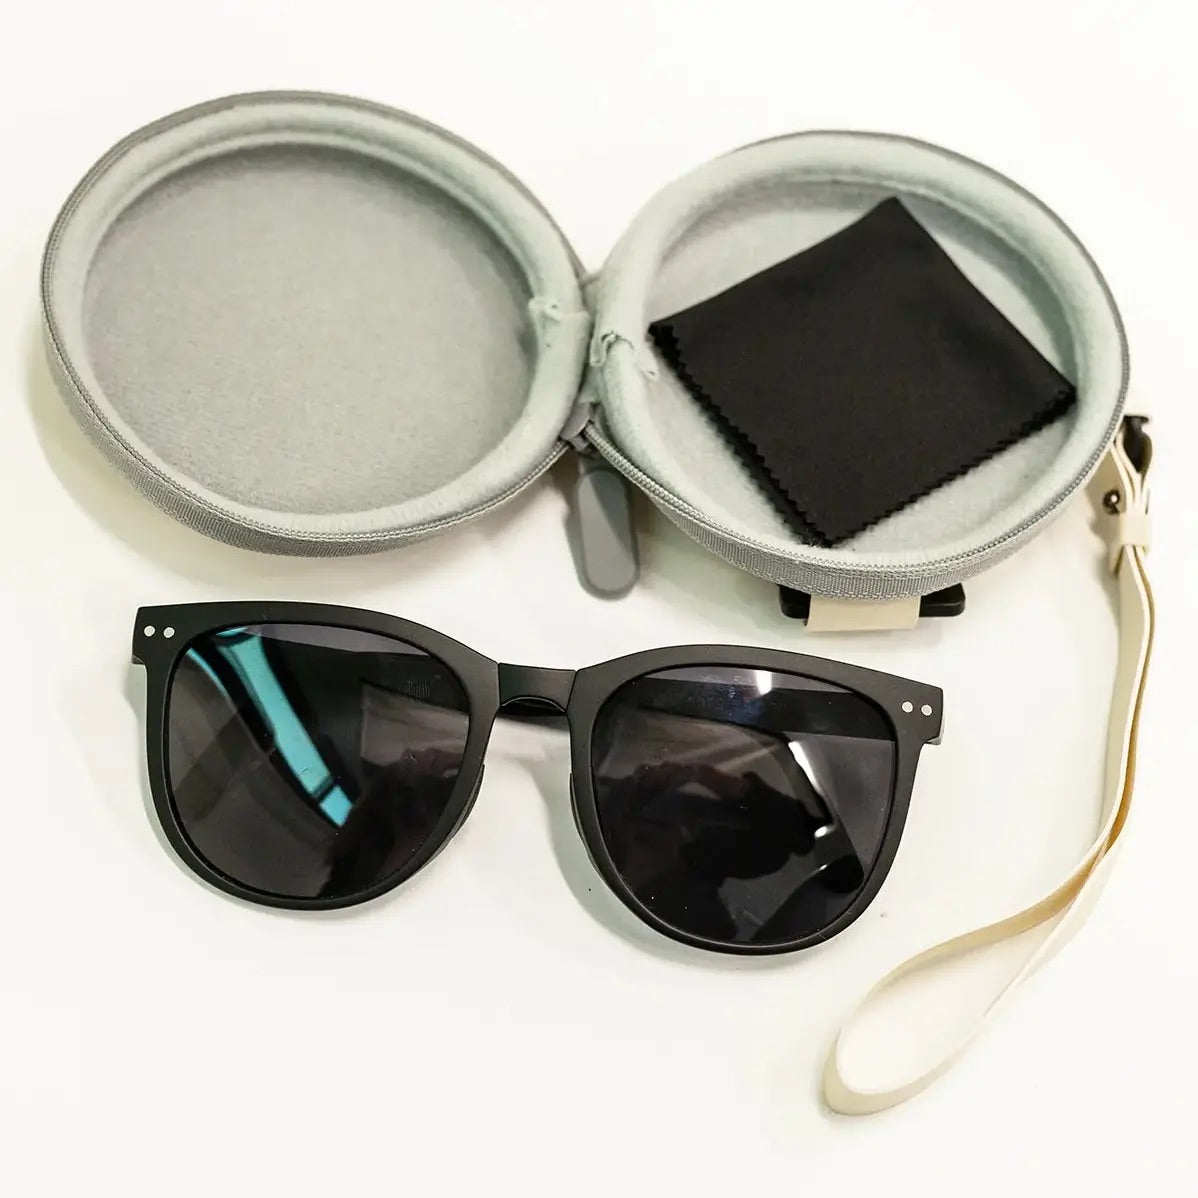 Collapsible Sunnies and Case